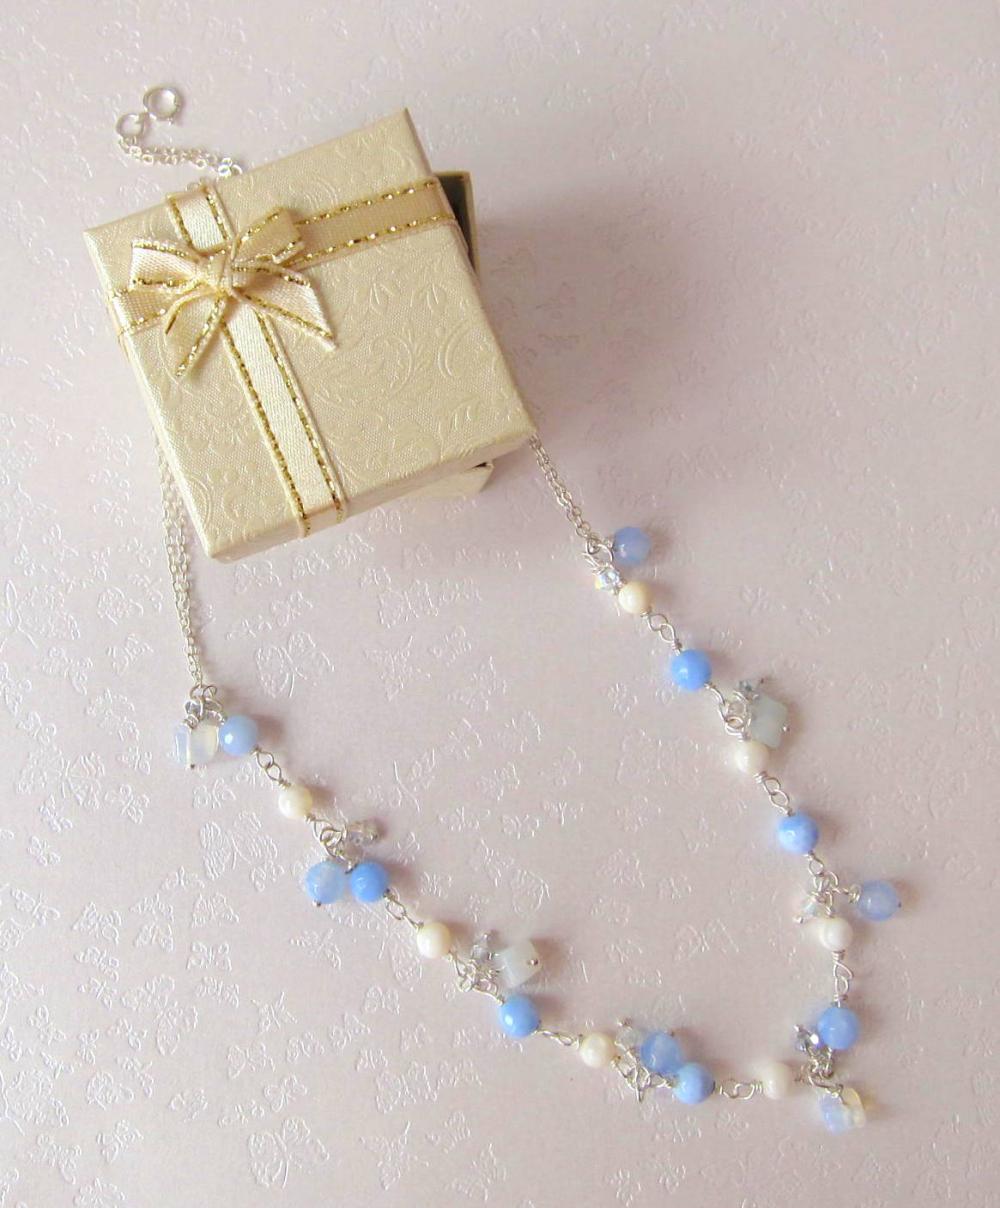 My Fair Lady Necklace-925 Silver, Blue Agate, Moonstone, Shell Pearl & Swarovski Crystals